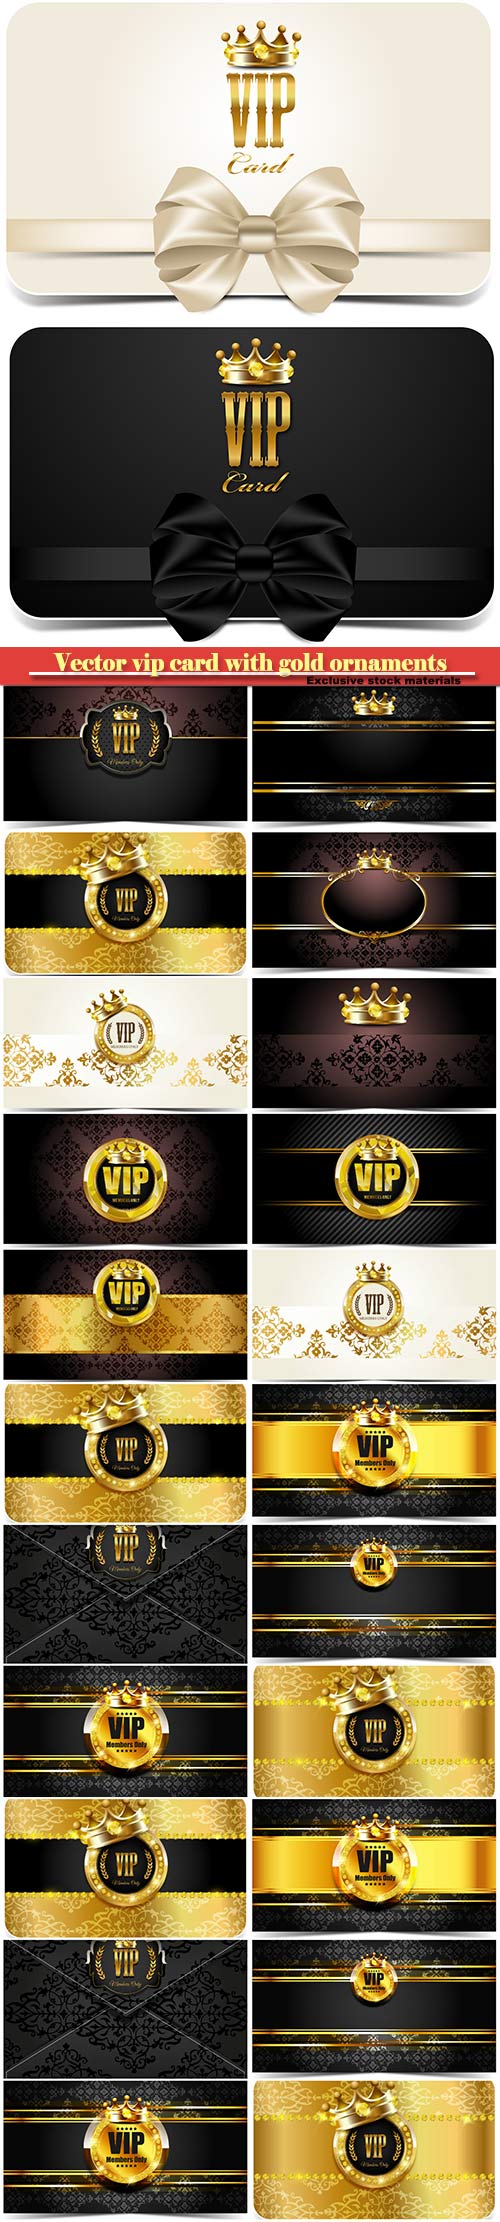 Vector vip card with gold ornaments and crown